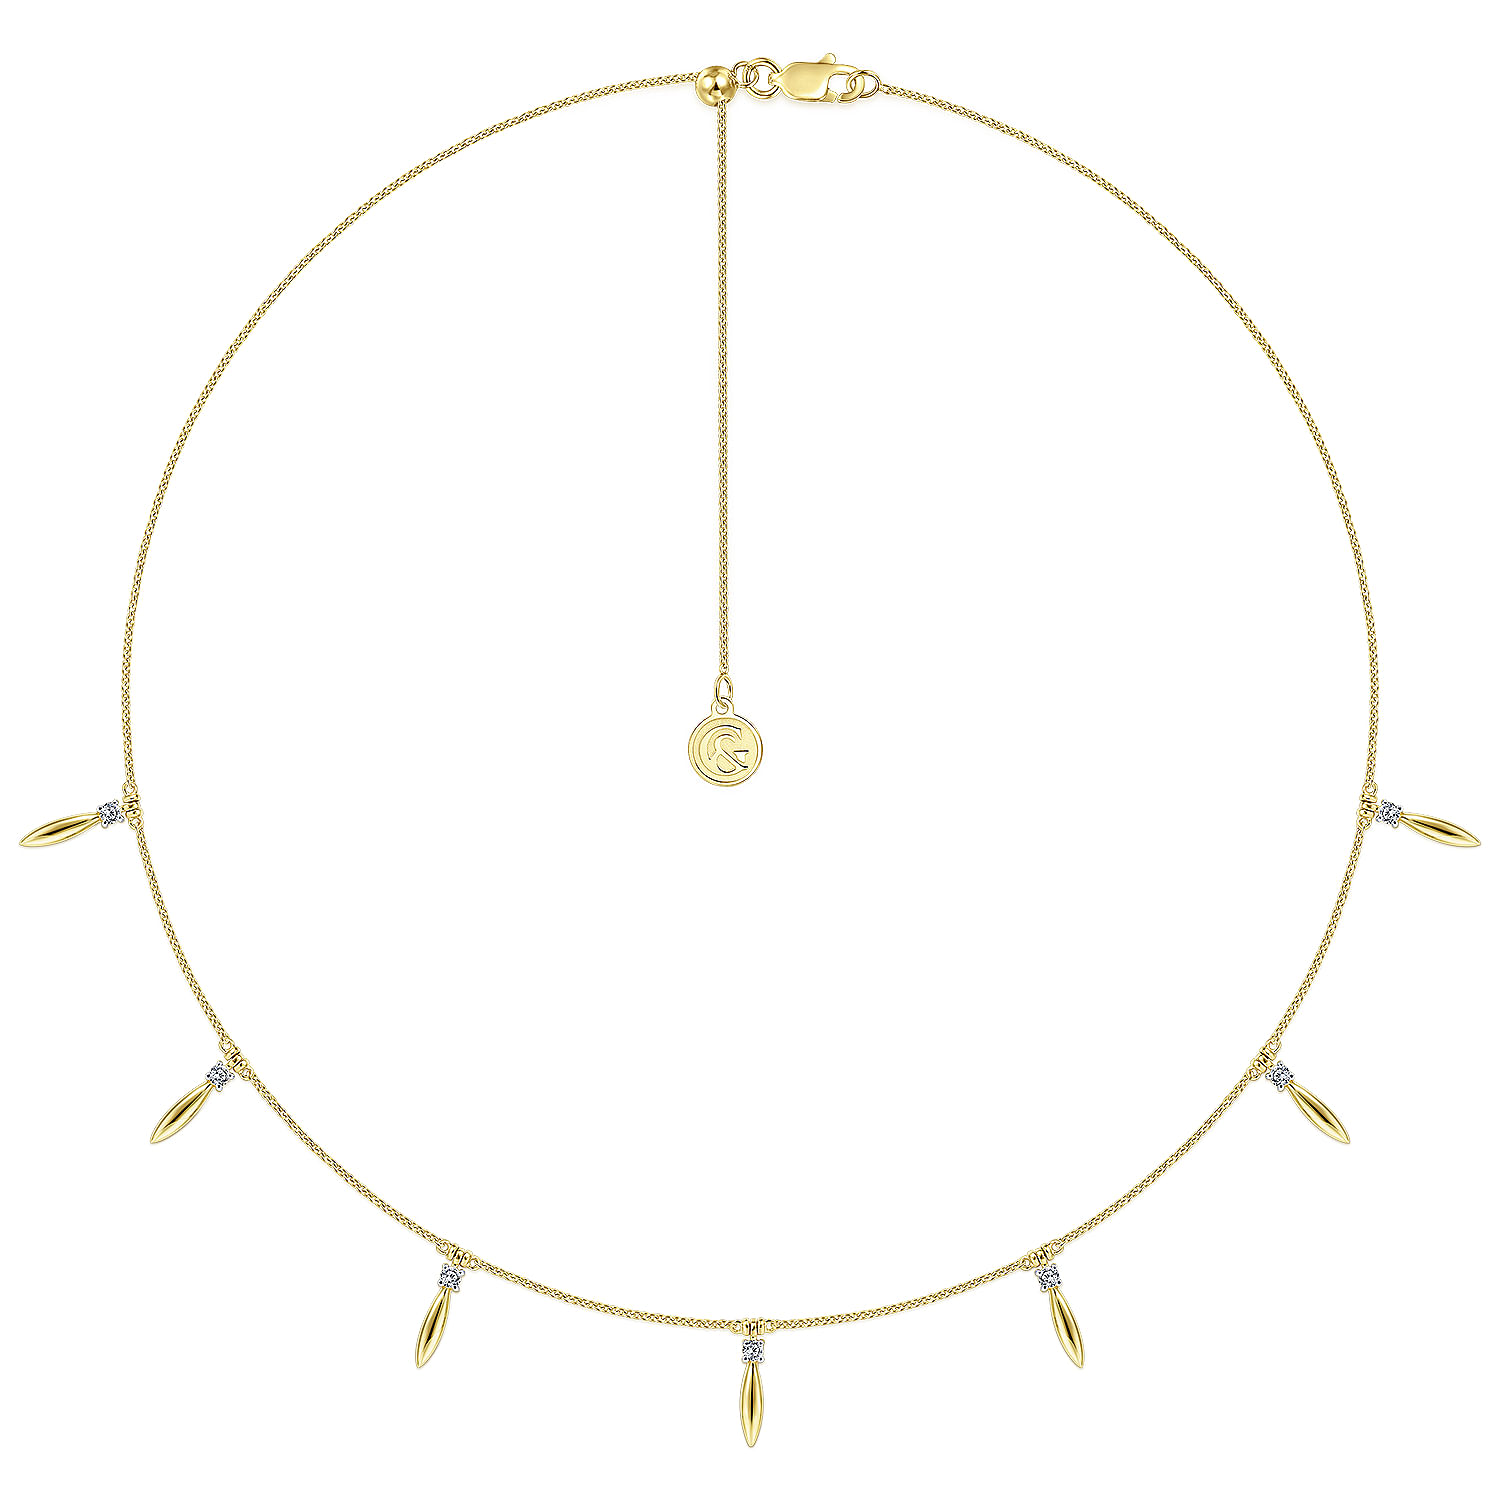 14K Yellow Gold Choker Necklace with Diamond and Spike Drops